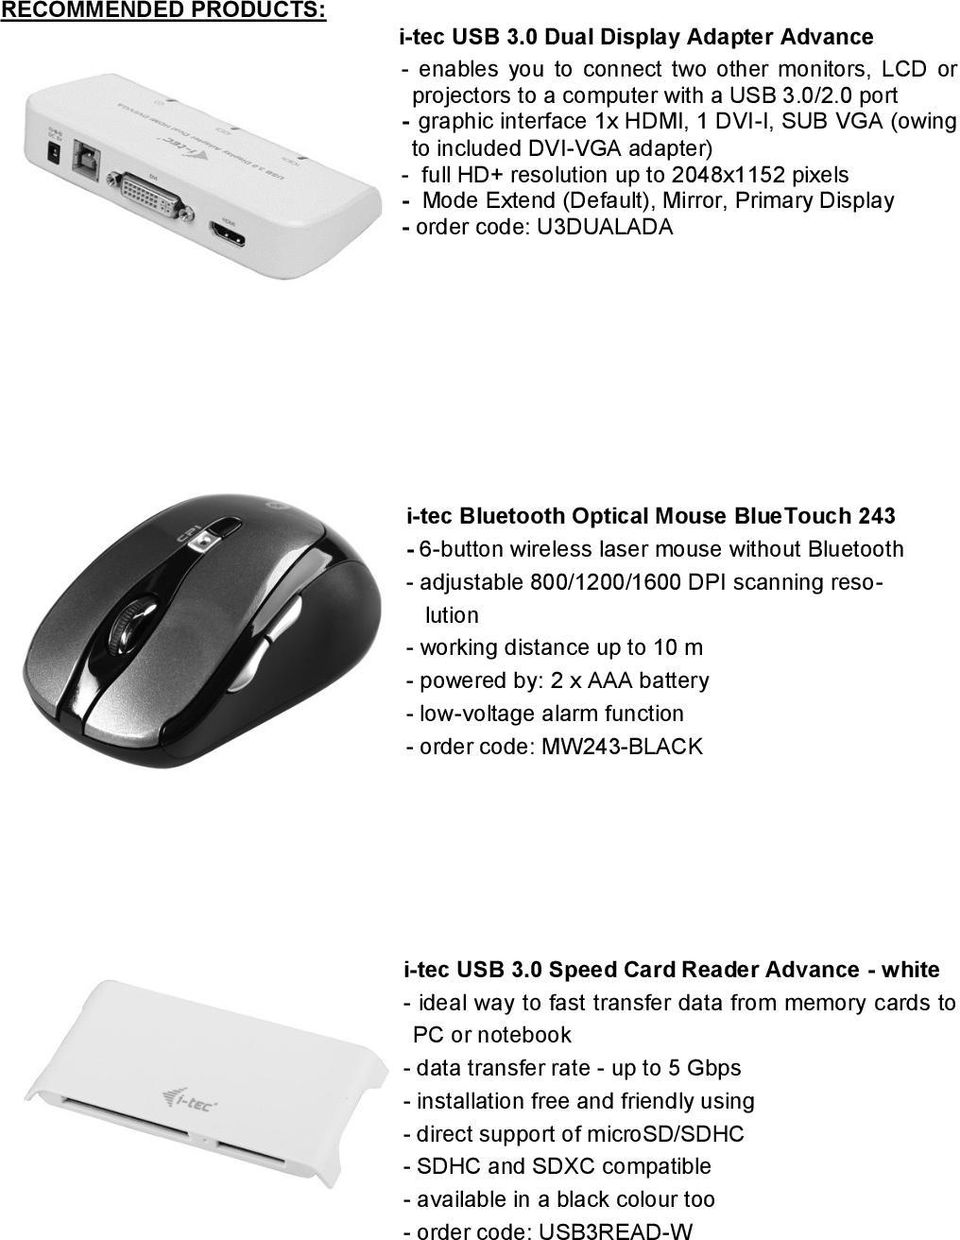 U3DUALADA i-tec Bluetooth Optical Mouse BlueTouch 243-6-button wireless laser mouse without Bluetooth - adjustable 800/1200/1600 DPI scanning resolution - working distance up to 10 m - powered by: 2